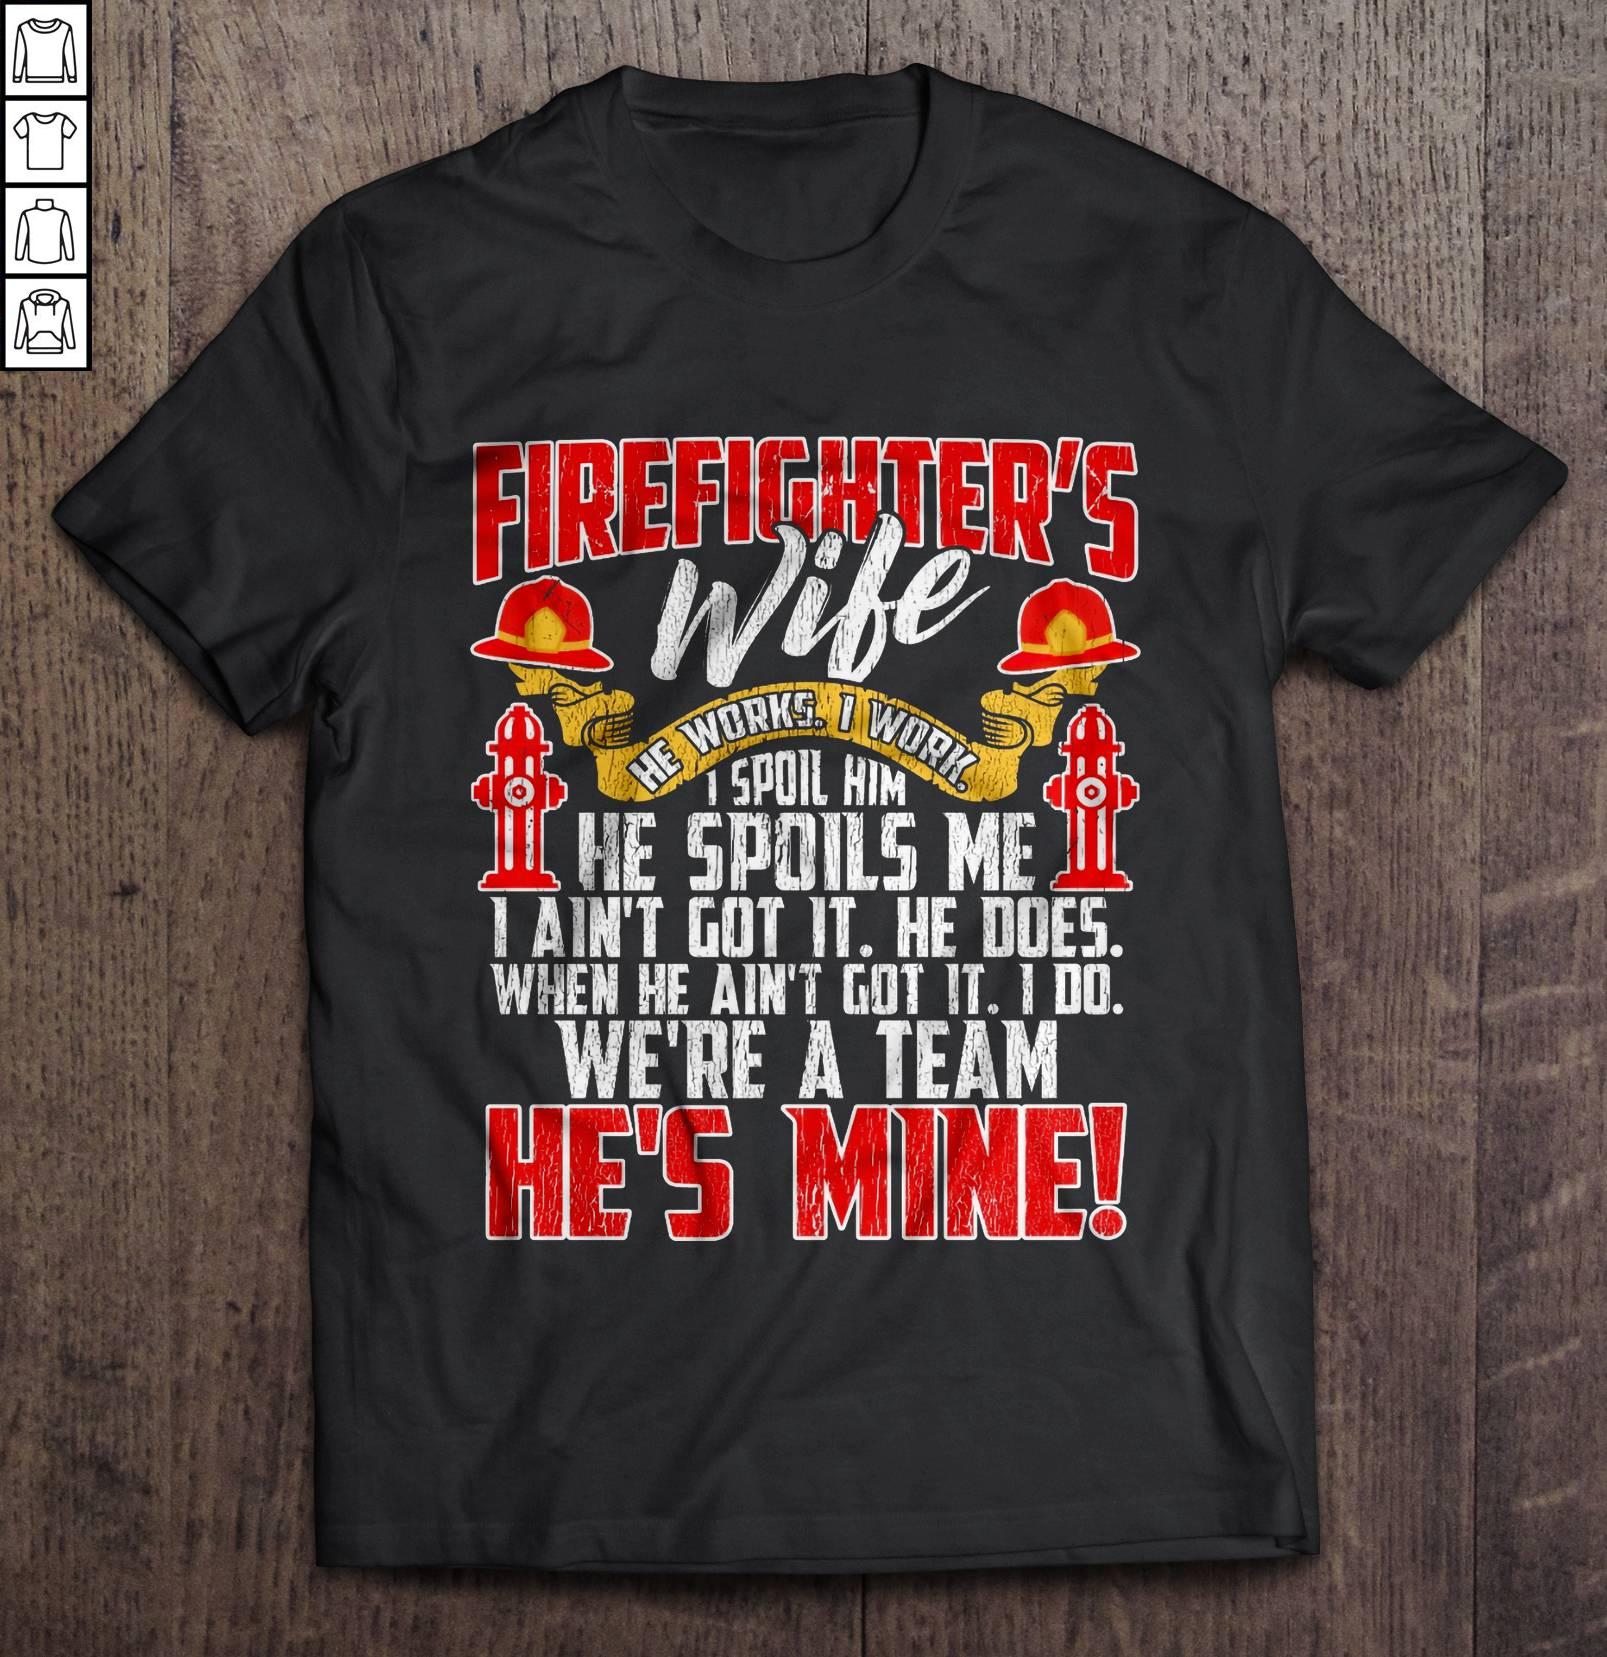 Firefighter’s Wife He Works I Work I Spoil Him He Spoils Me I Ain’t Got It He Does Gift TShirt